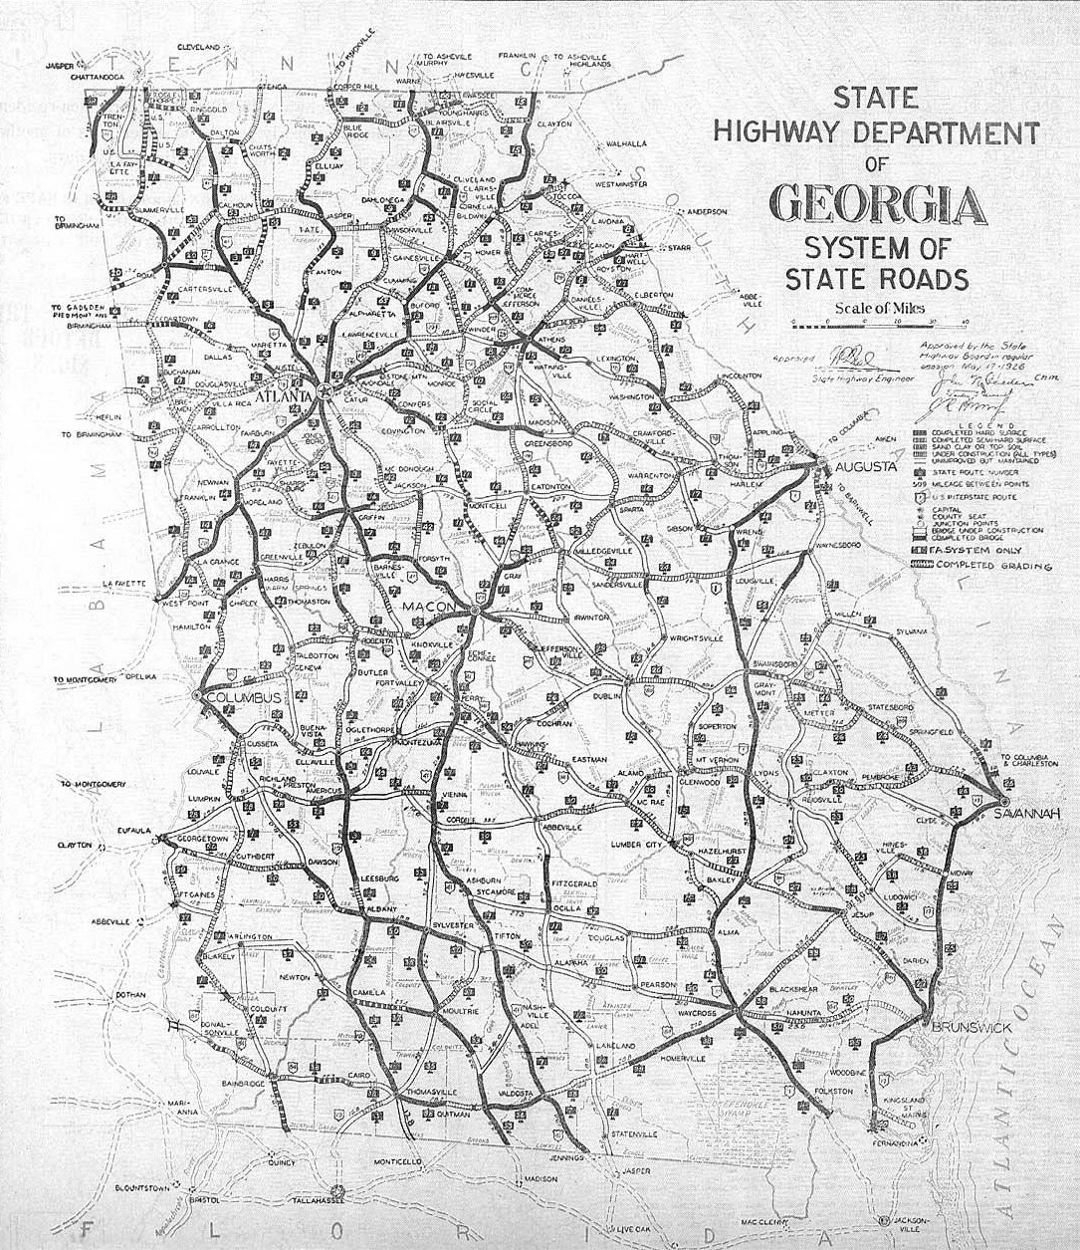 Old road system map of Georgia state - 1929